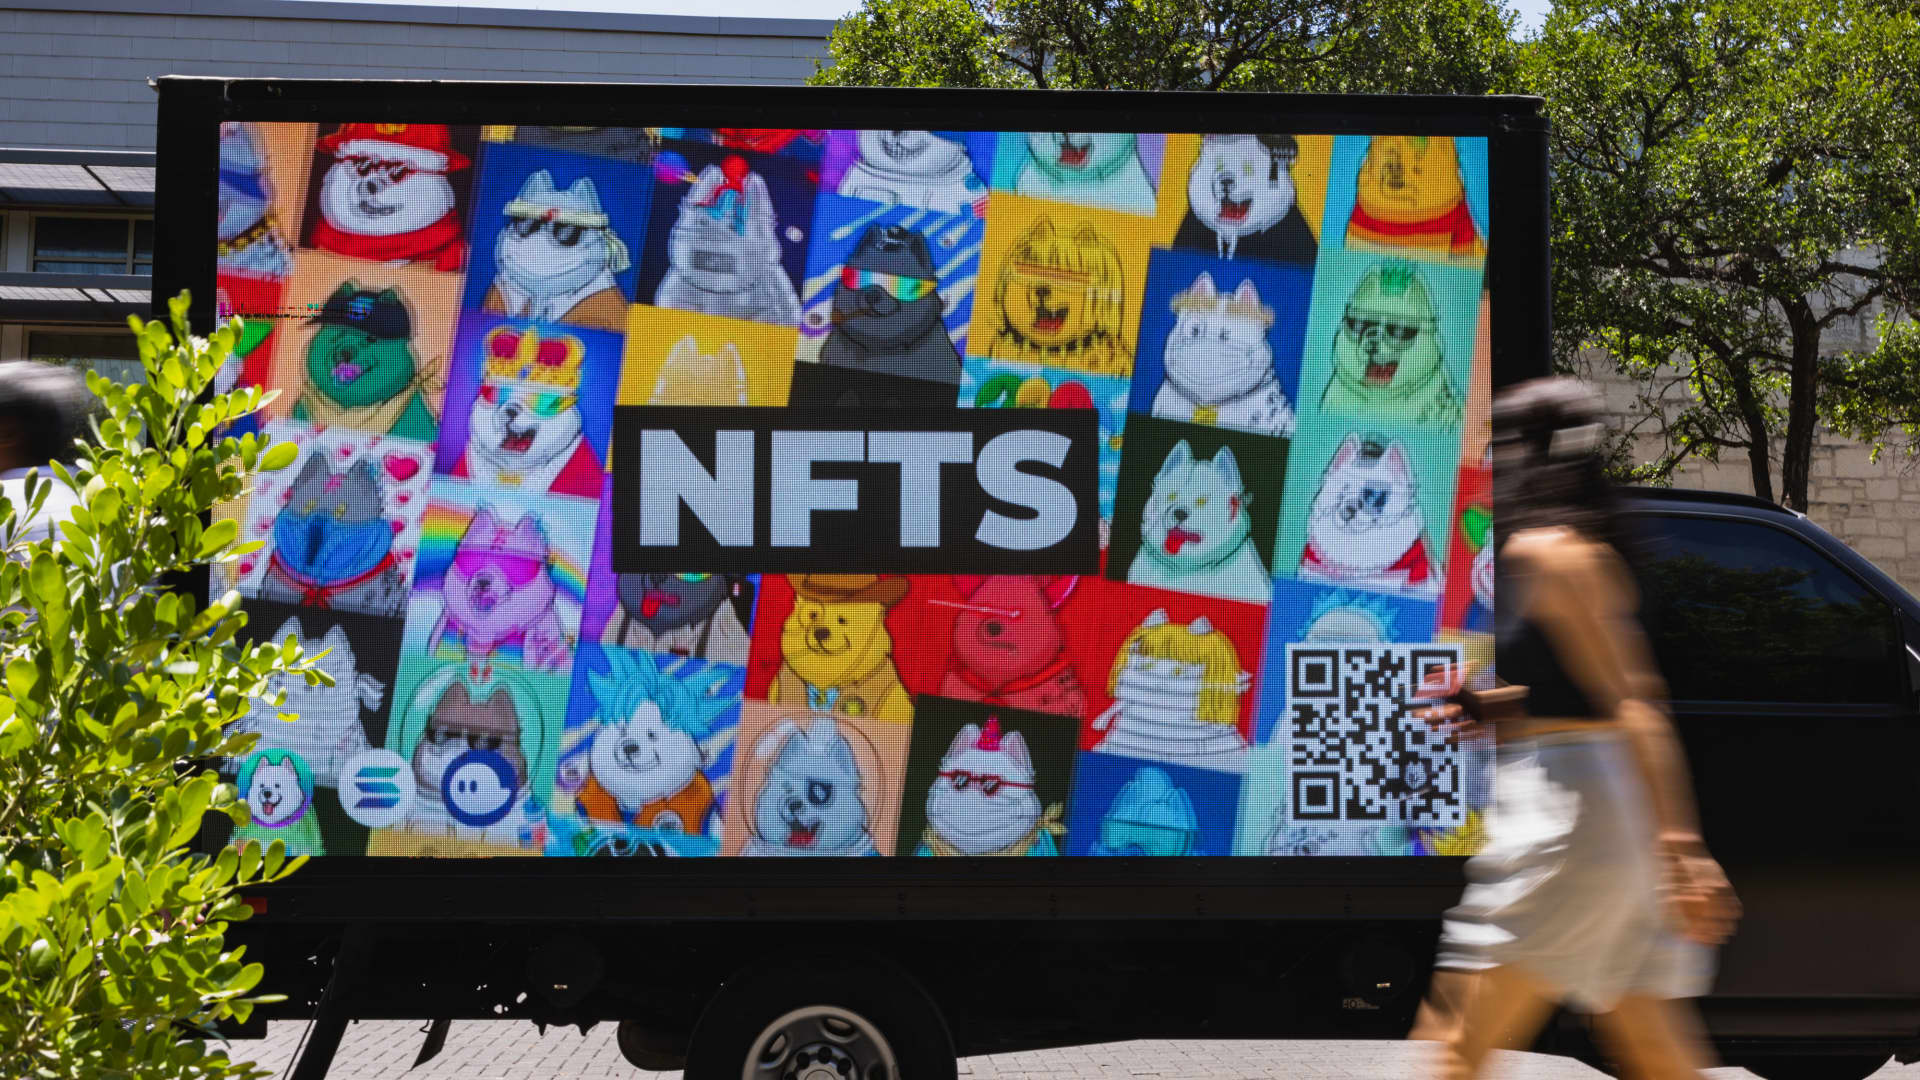 An NFT advertisement during the CoinDesk 2022 Consensus Festival in Austin, Texas, US, on Thursday, June 9, 2022. The festival showcases all sides of the blockchain, crypto, NFT, and Web 3 ecosystems, and their wide-reaching effect on commerce, culture, and communities.